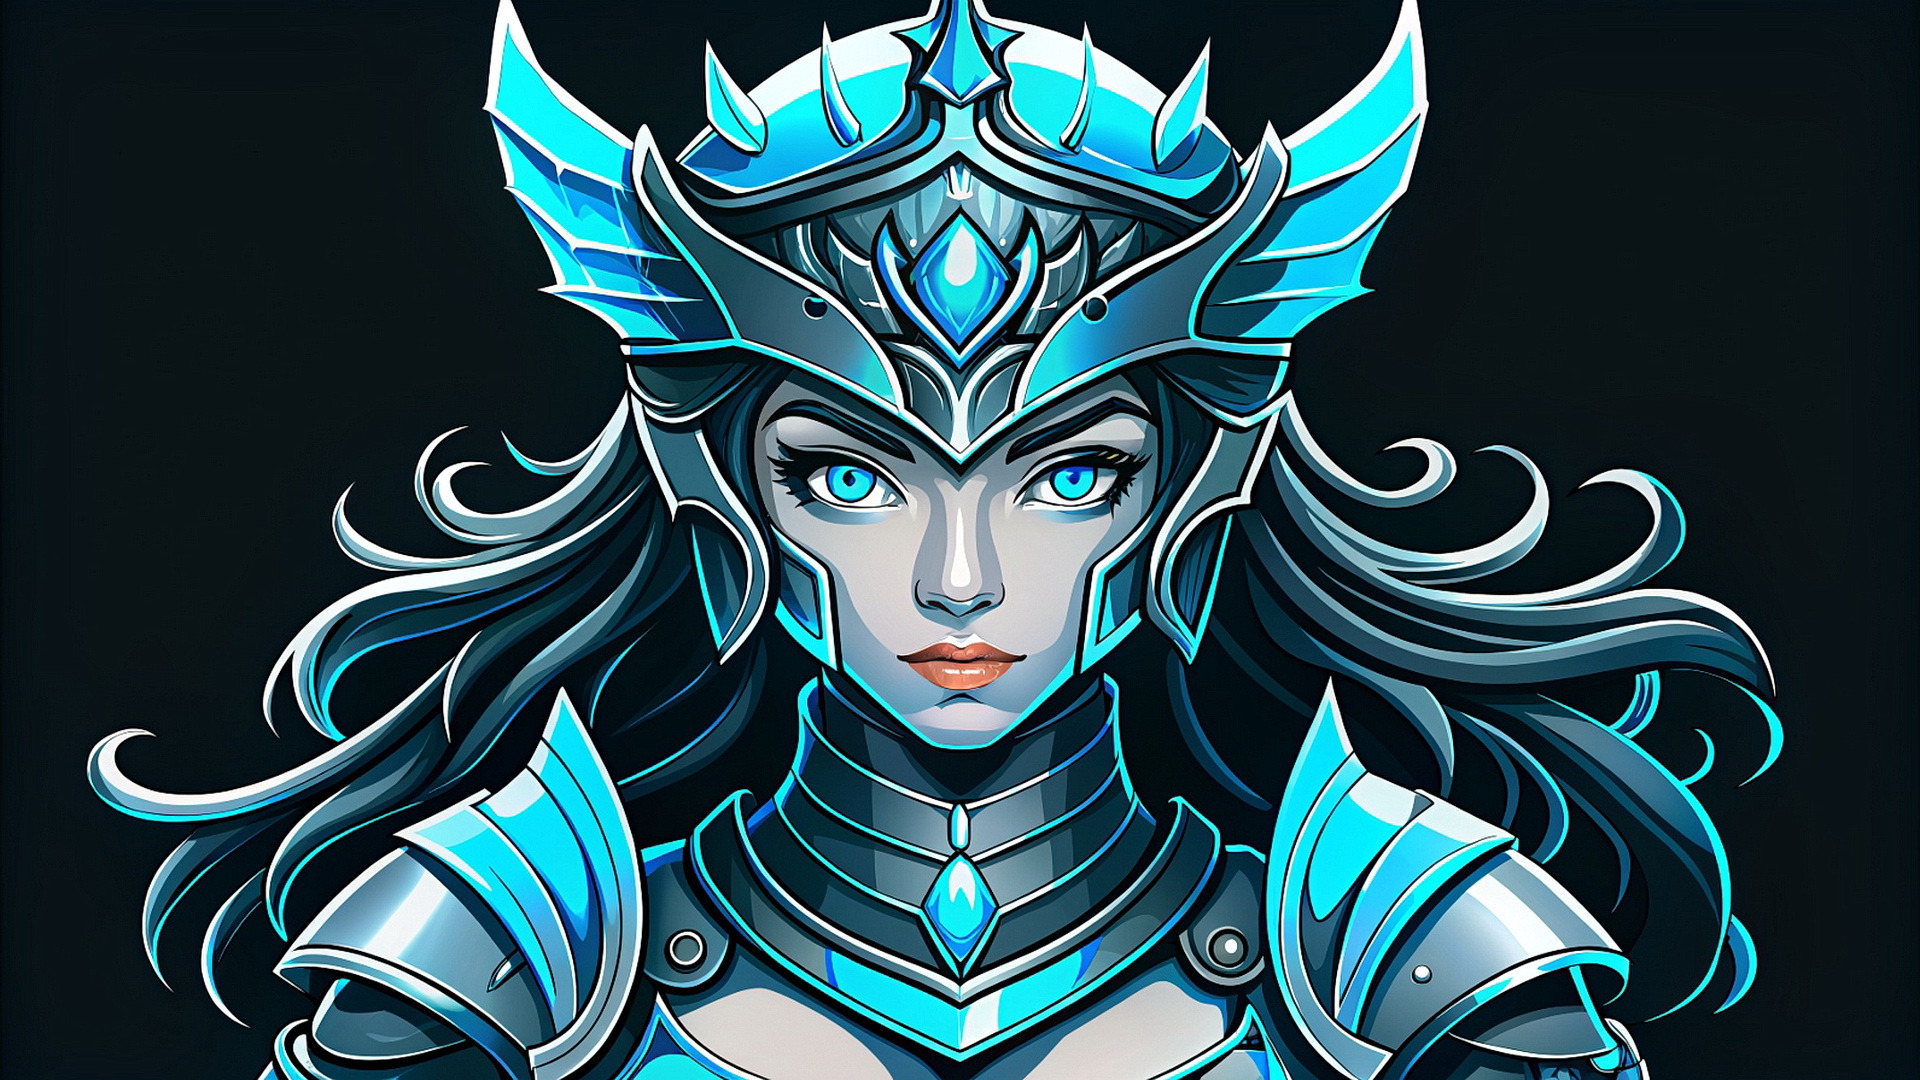 Drawing of a girl in helmet and armor on a black background